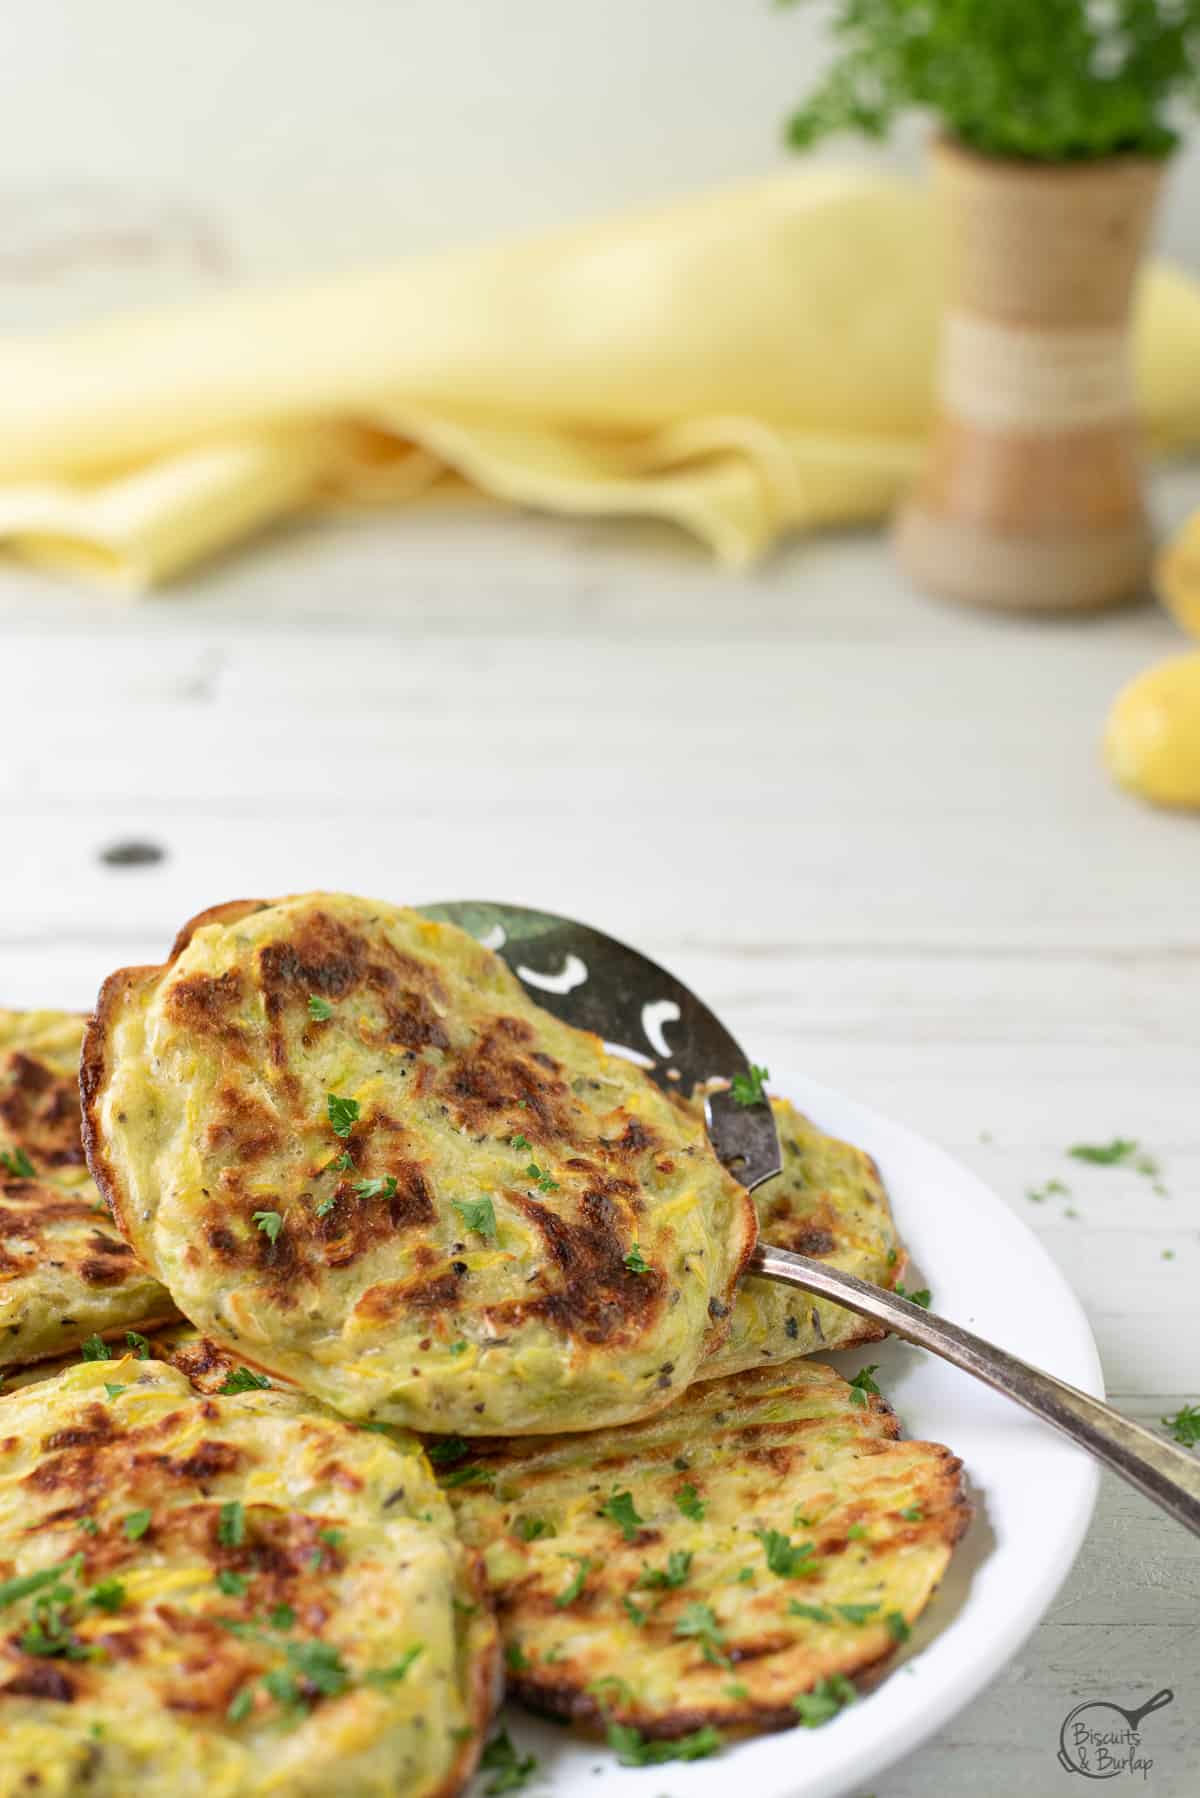 yellow squash fritters (squash patties) that have been oven baked. 